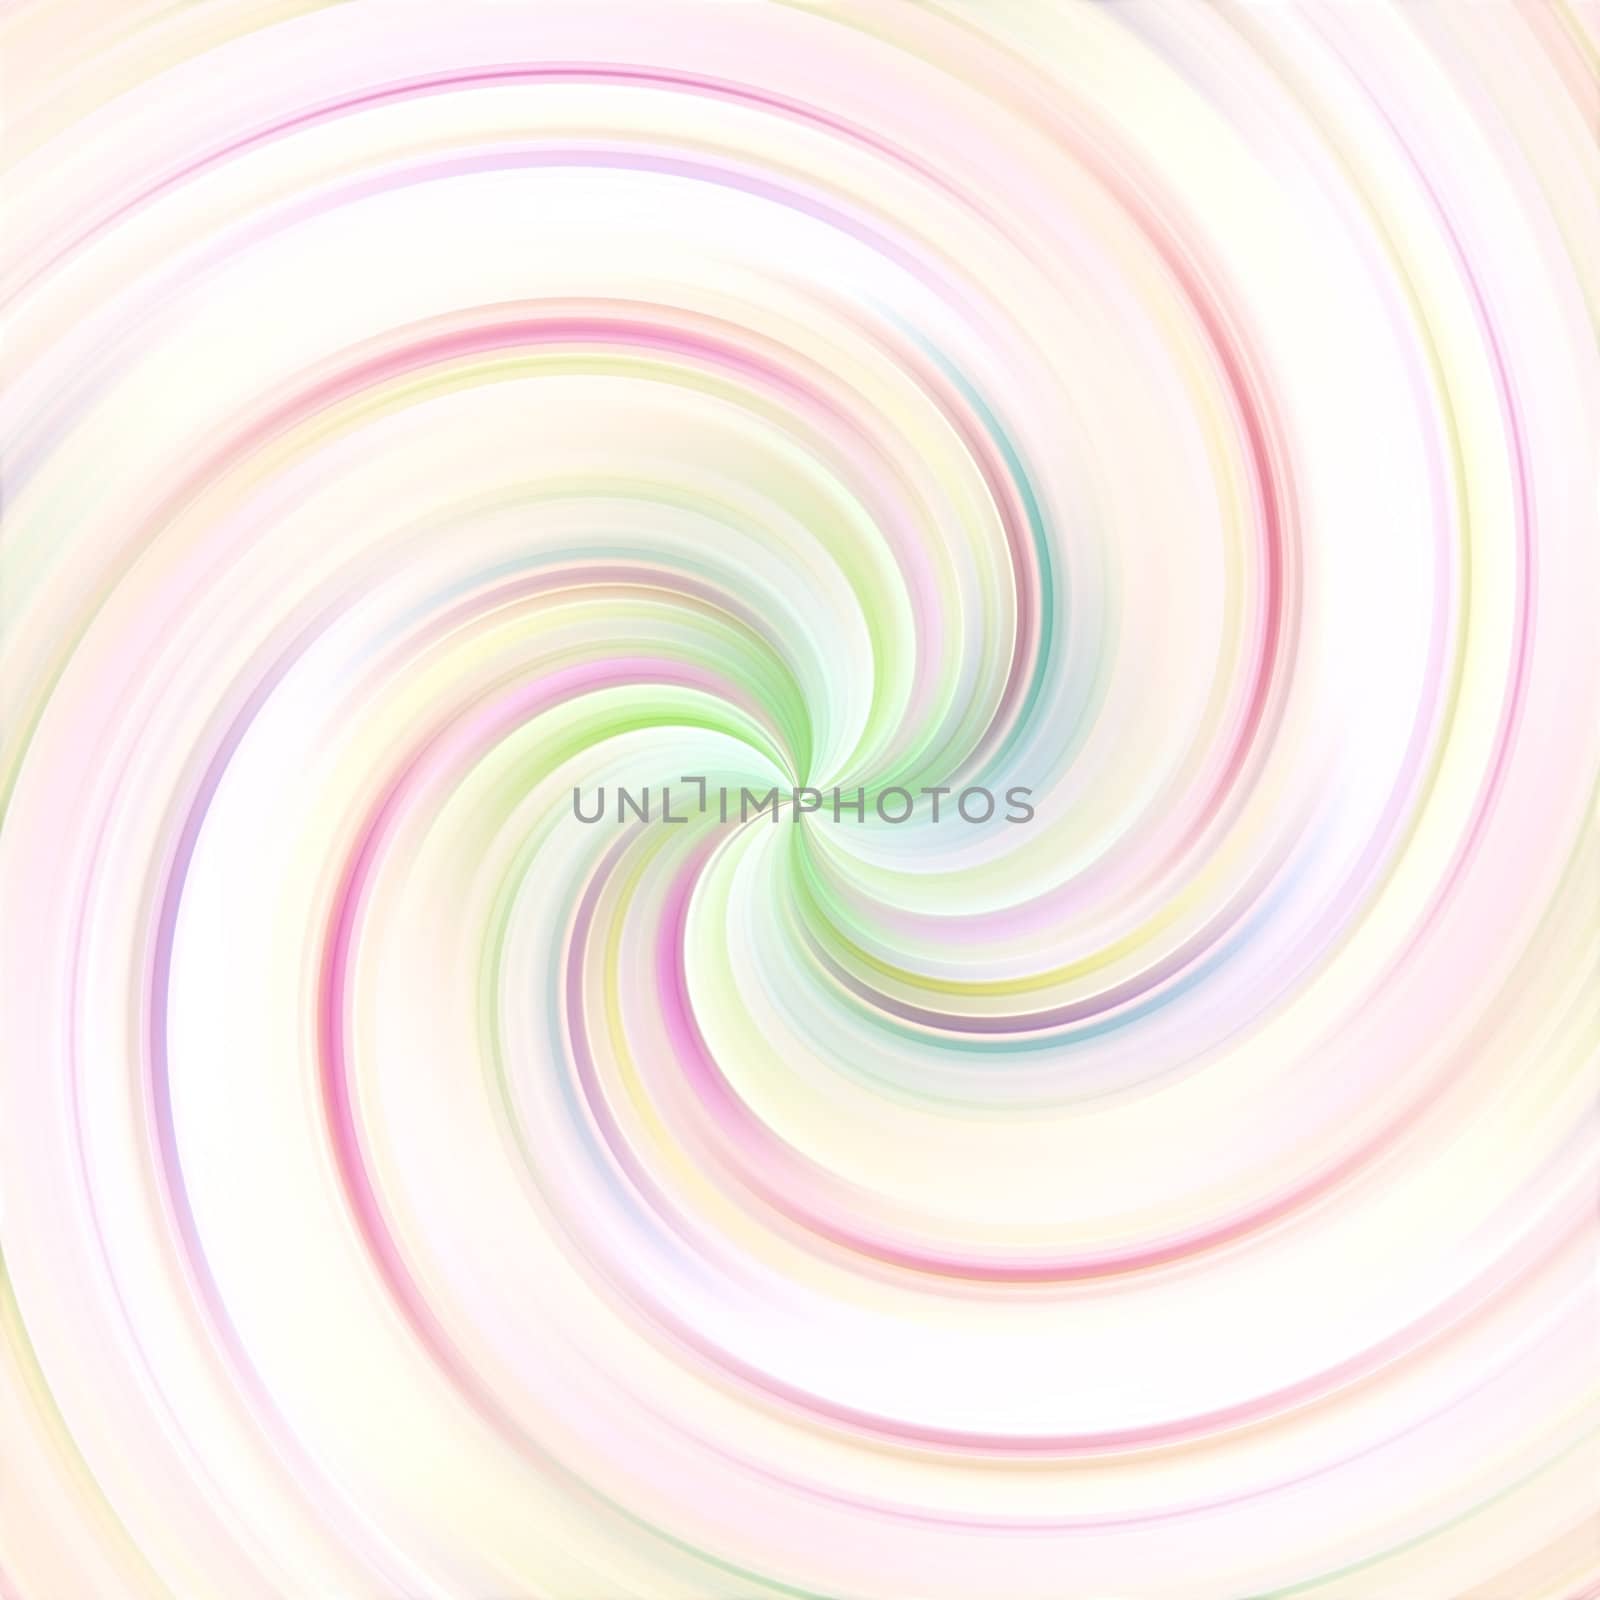 swirling abstract shape in soft pastel colors